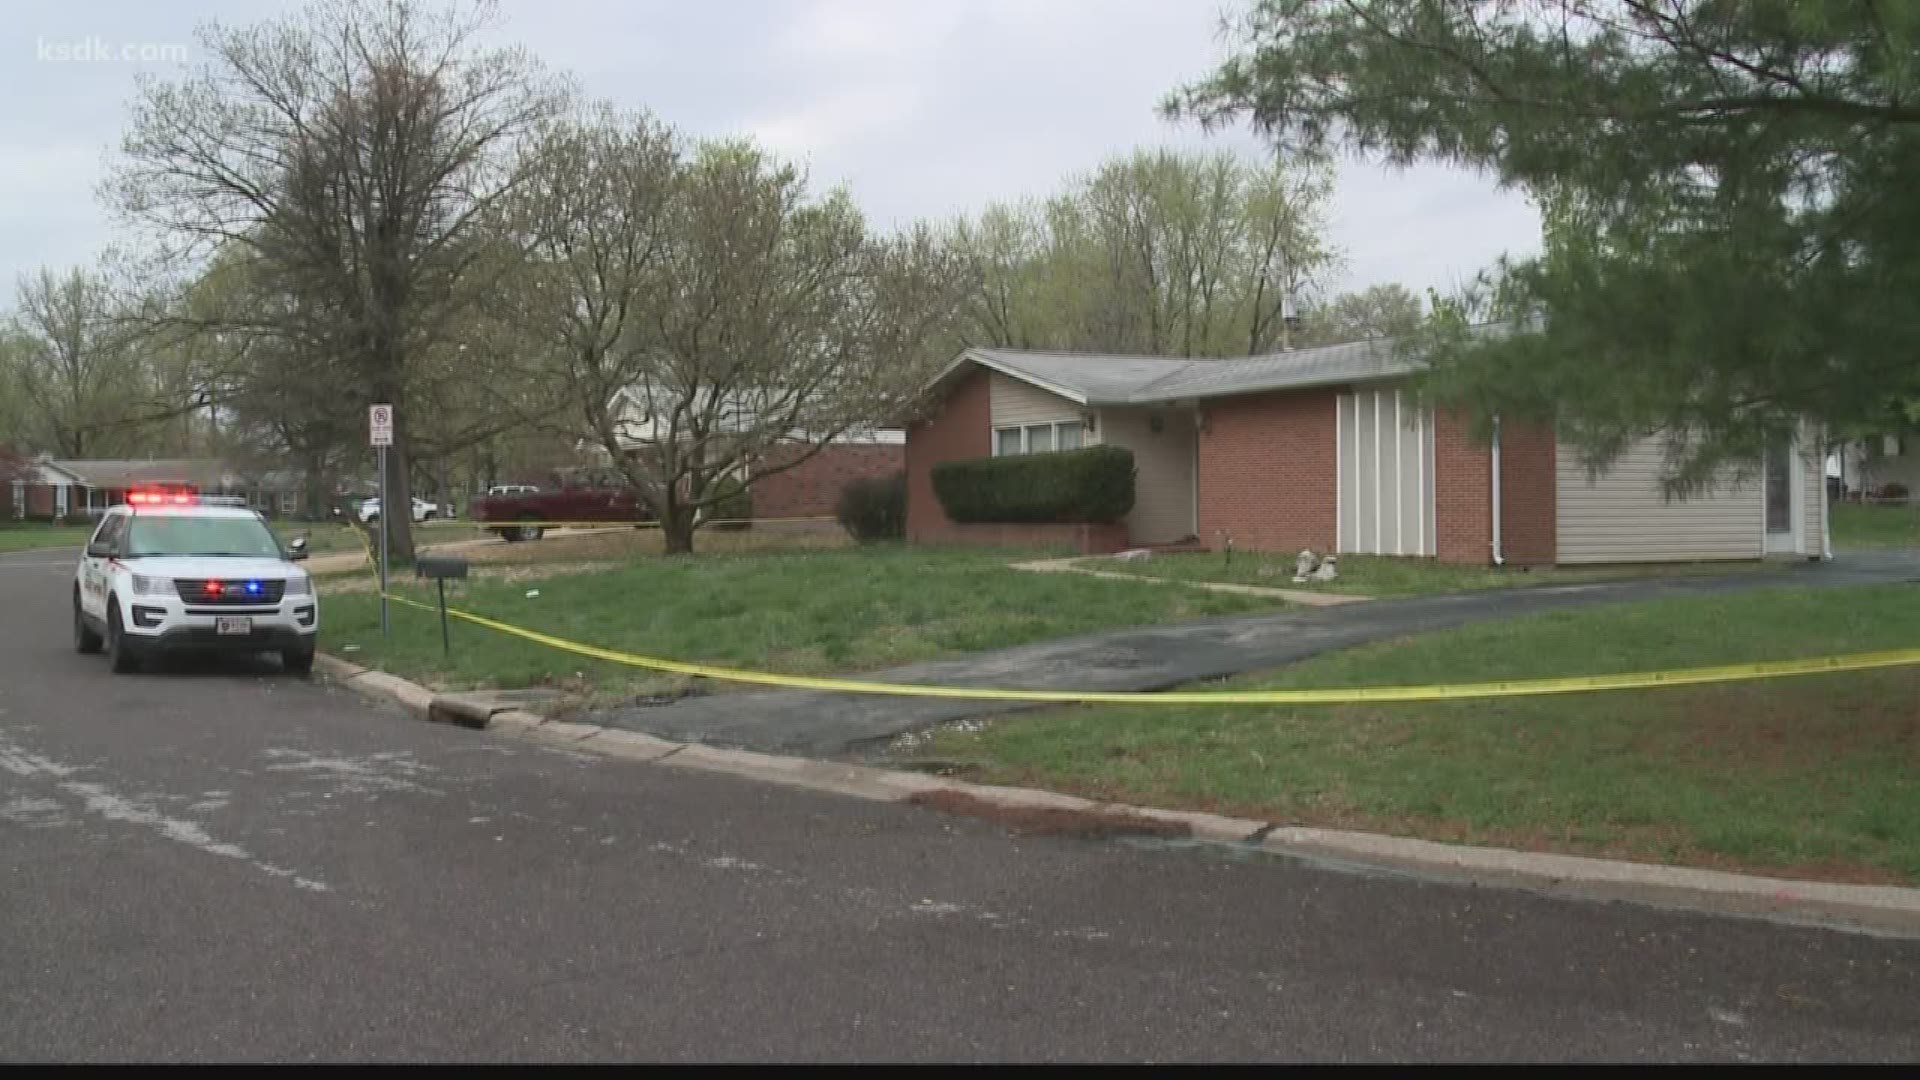 Police said the boy was found with a gunshot wound inside a Spanish Lake home. He later died at the hospital.